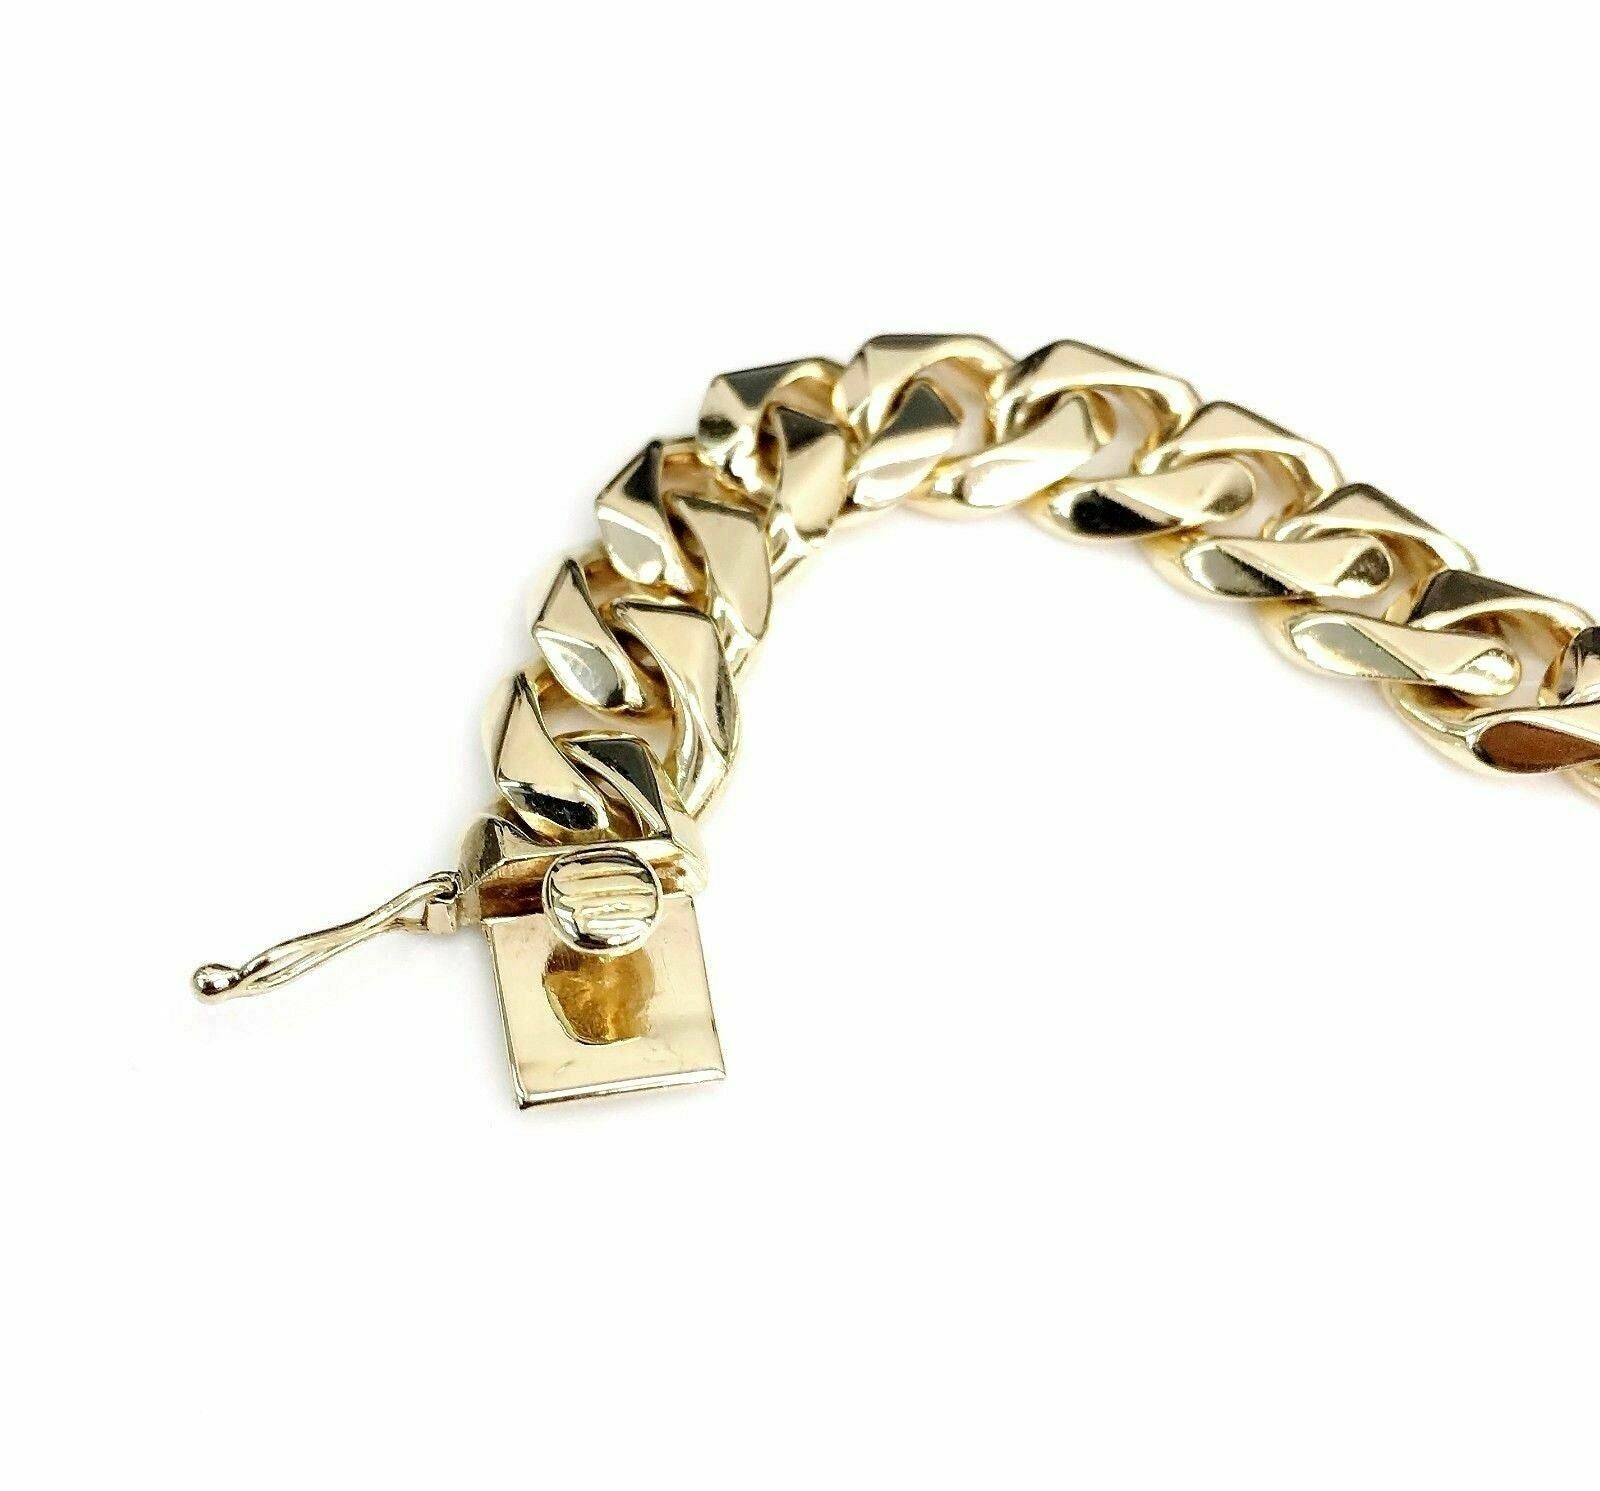 100% Real Gold 24K Gold GF Stamp Yellow Mens Bracelet With Curb Chain Link  9 12mm Width Real And Gold Not Money From Qytyo, $19.5 | DHgate.Com